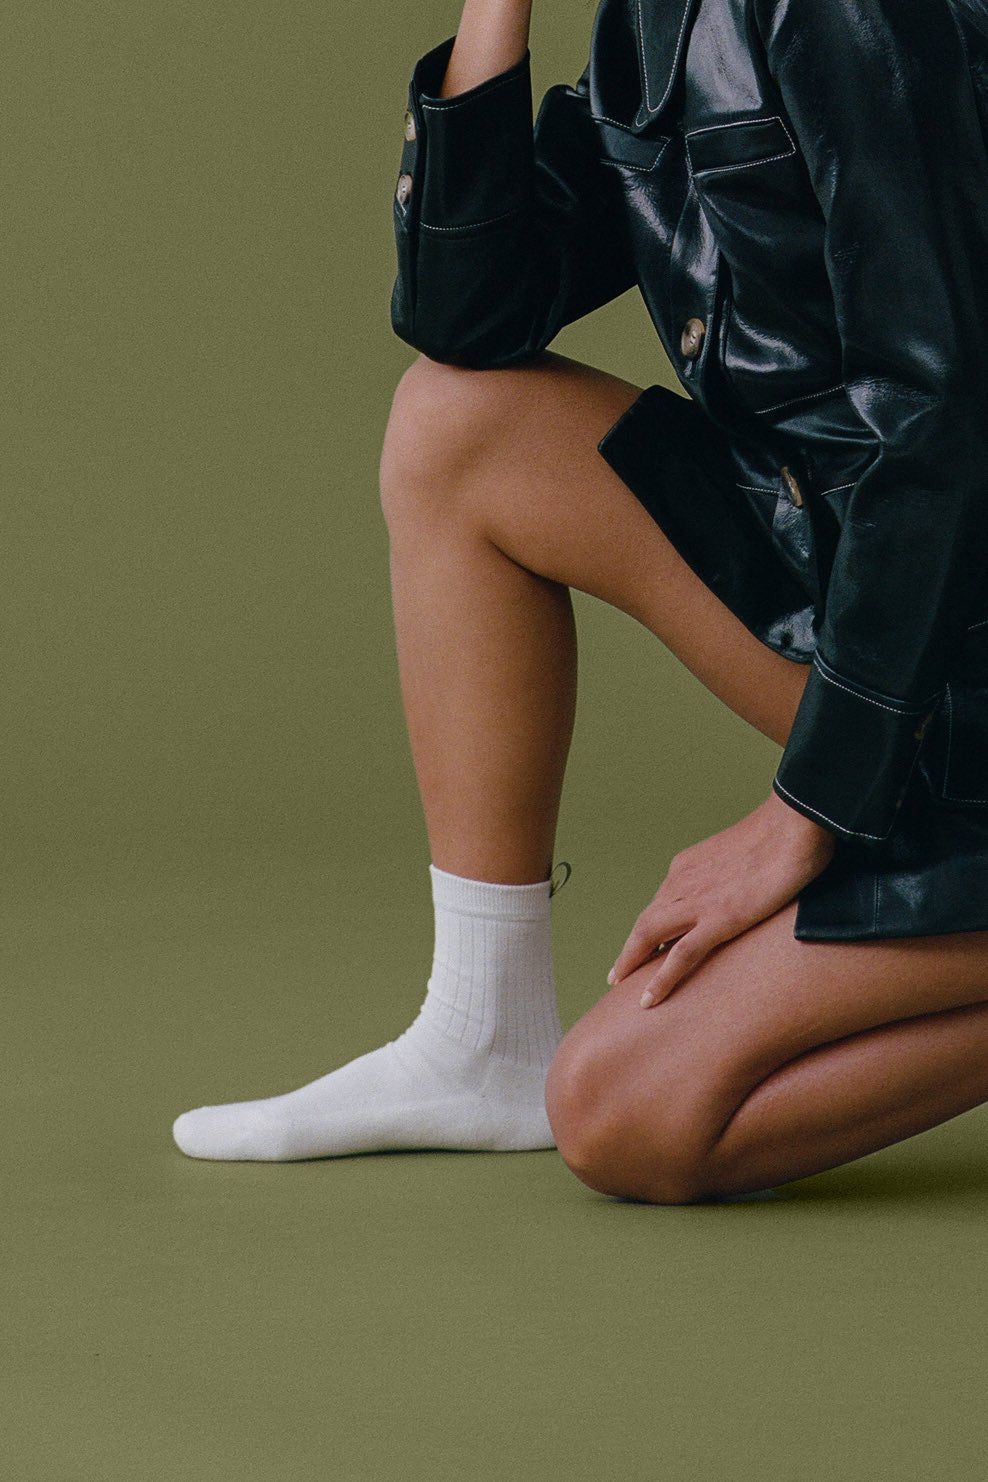 Michelle wears The Everyday Sock in Off White with a black leather jacket on an olive green backdrop.